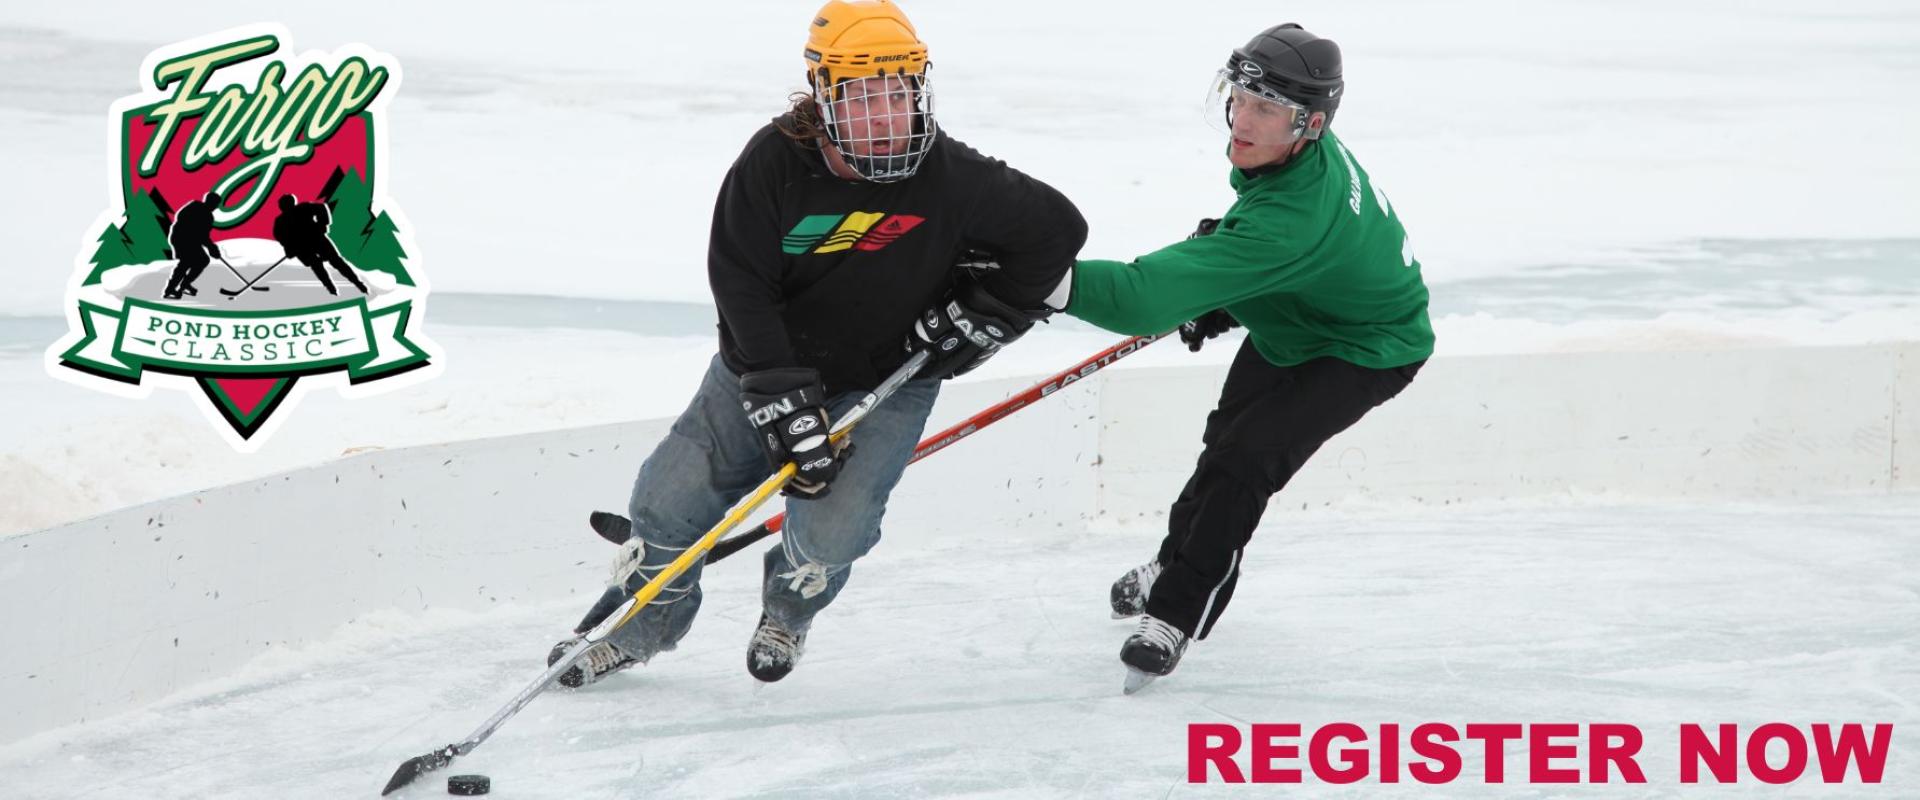 This image shows two hockey players with the pond hockey logo